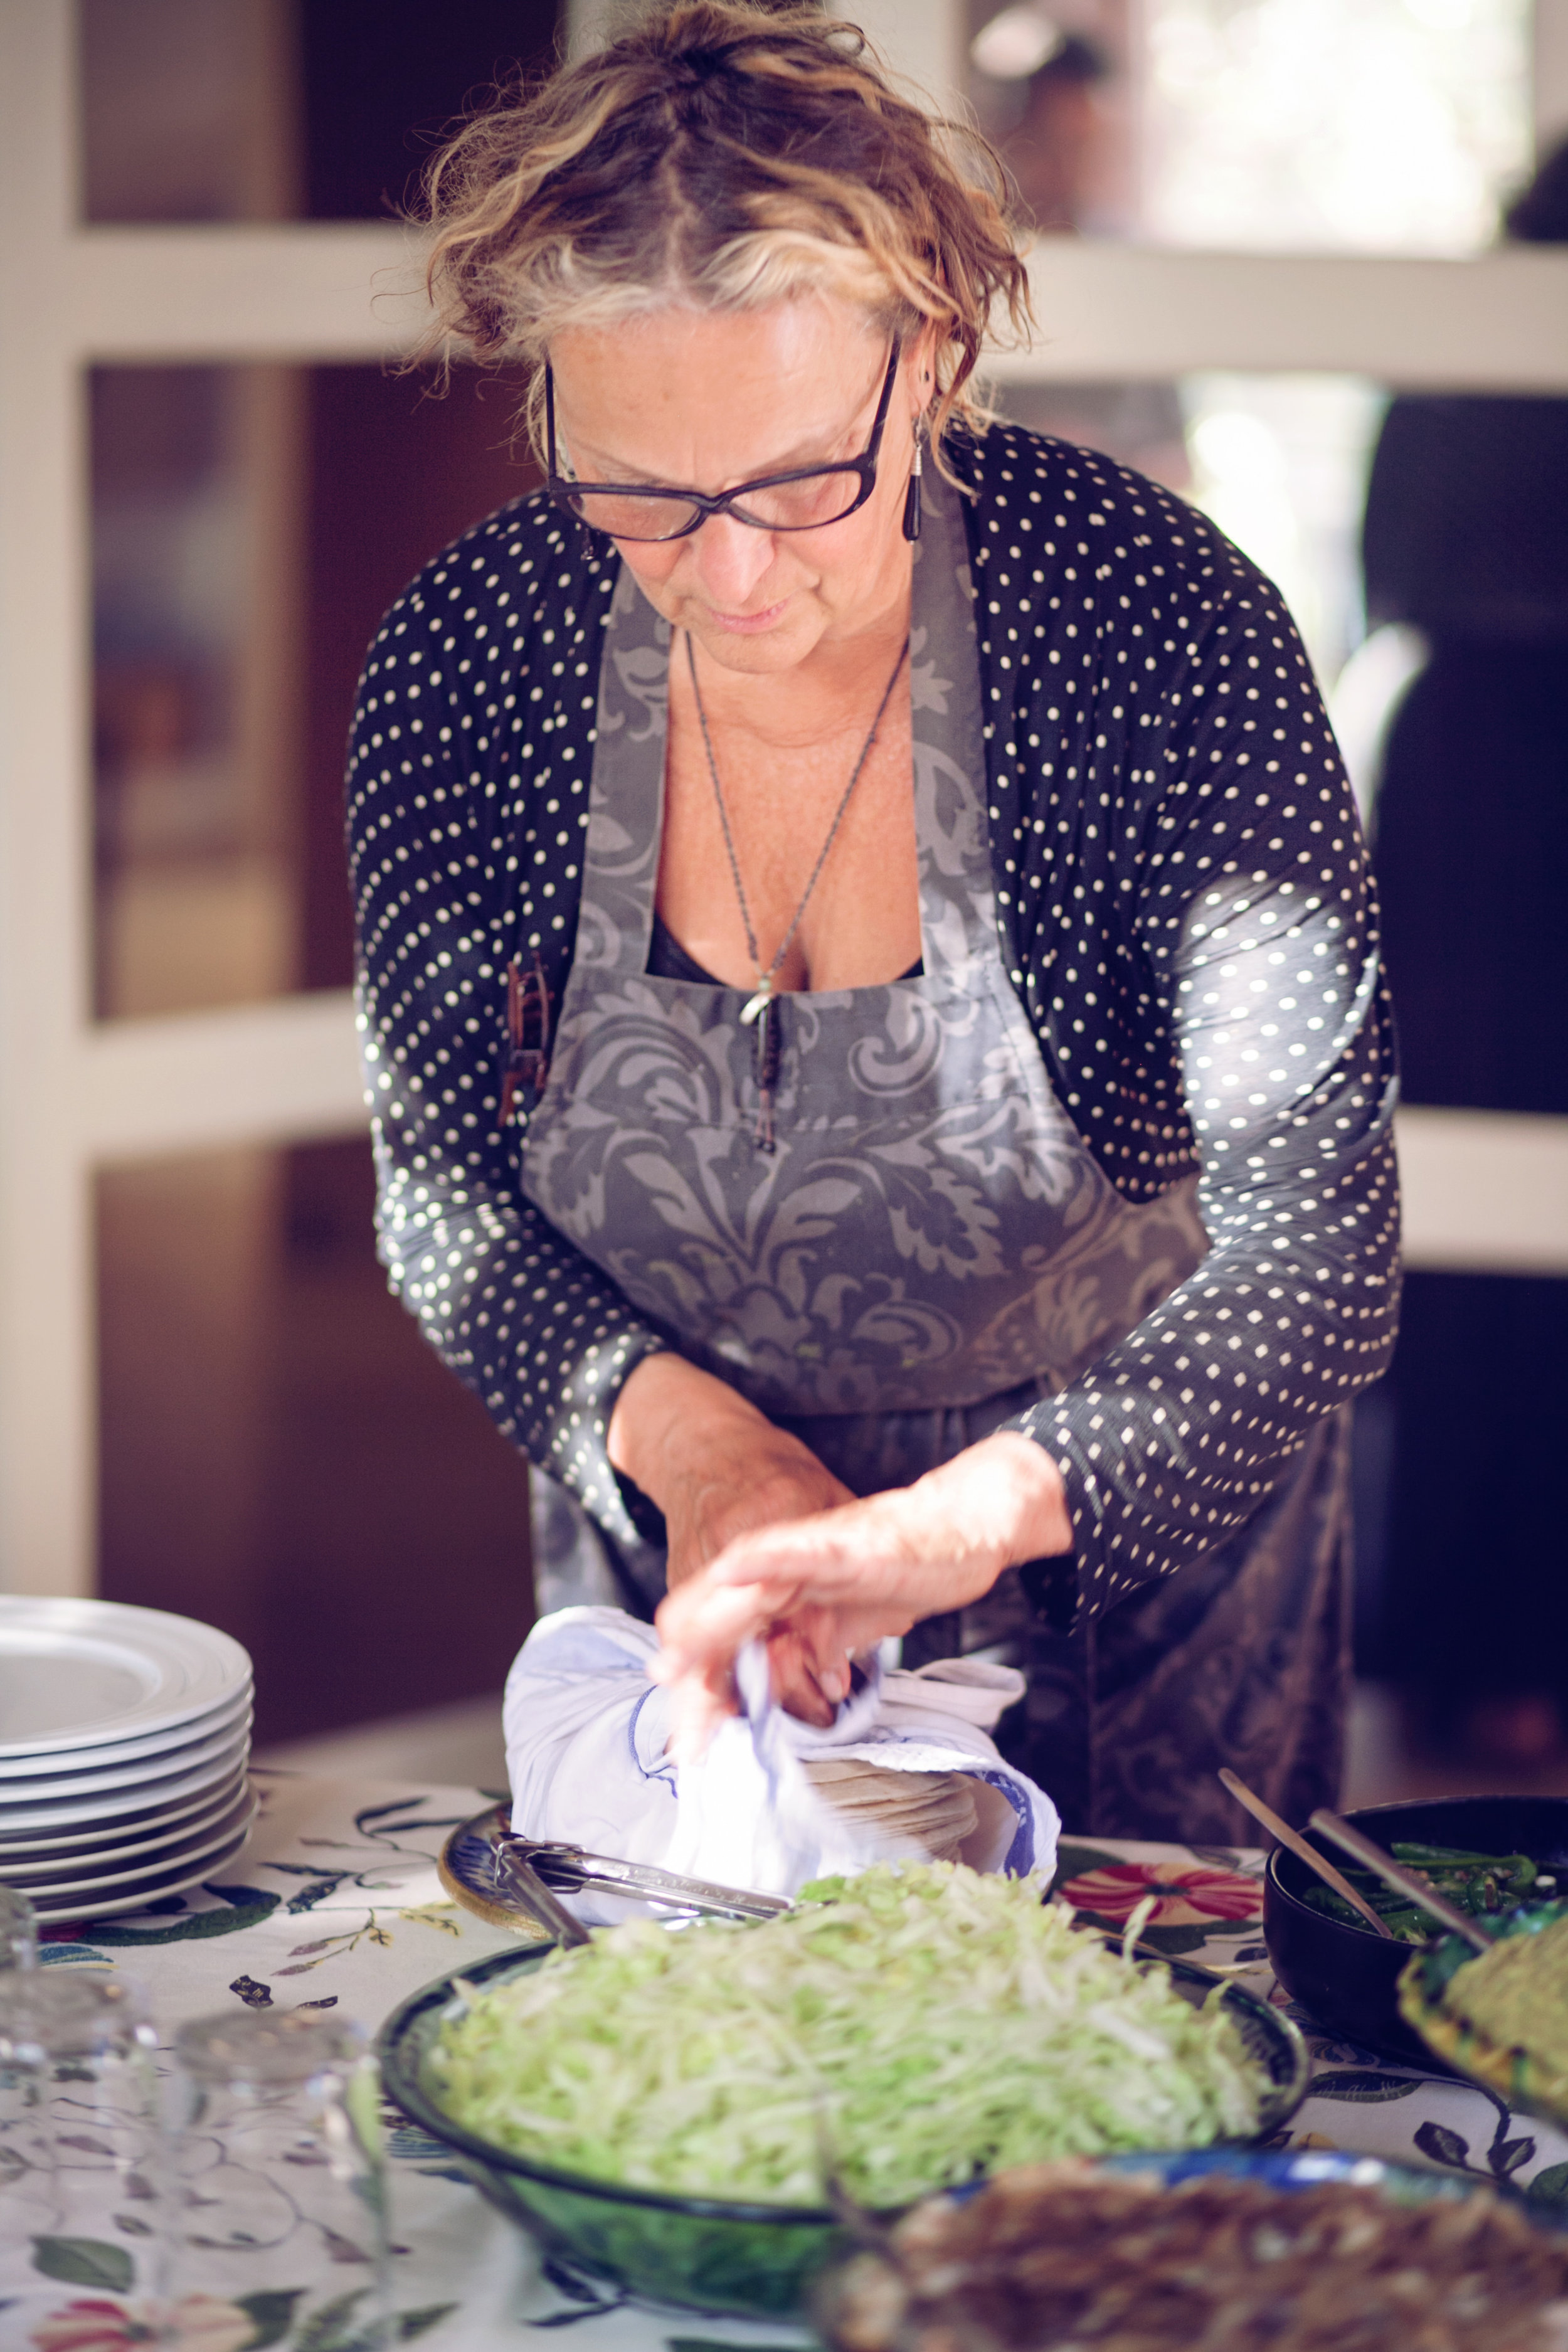 Our soulful cook, Astrid. Nourishment can mean many things, and it seems I was engaged in most of them here.